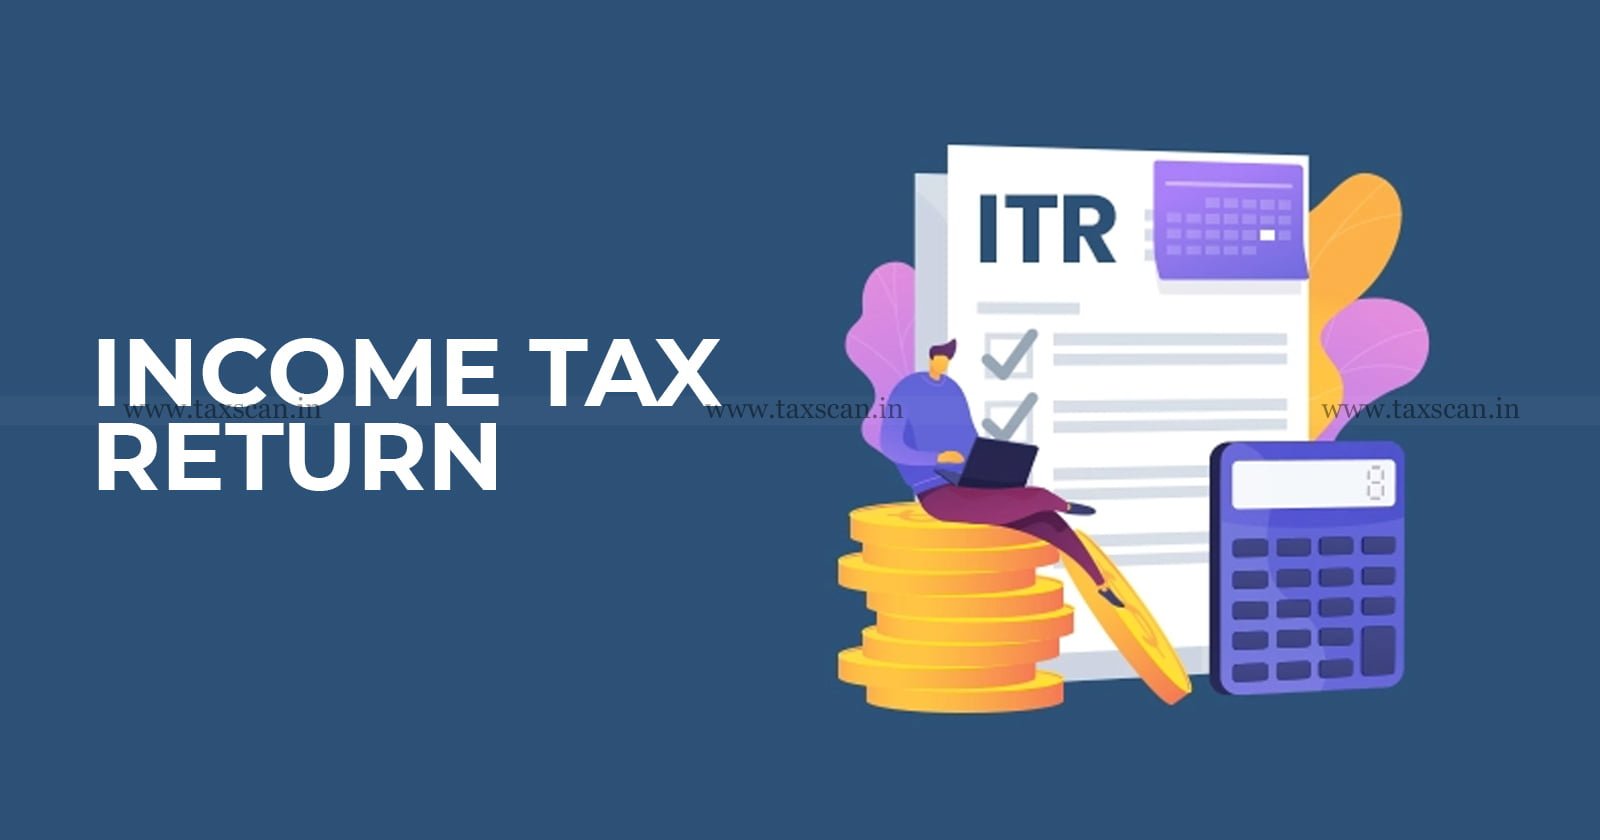 Ignorance - Income Earned - Income Earned from Partnership - Partnership - Income - Liable to Tax - tax - Reasonable Cause for Late Filing - Late Filing - Late Filing of ITR - ITR - ITAT Upholds Penalty - ITAT - Penalty - taxscan